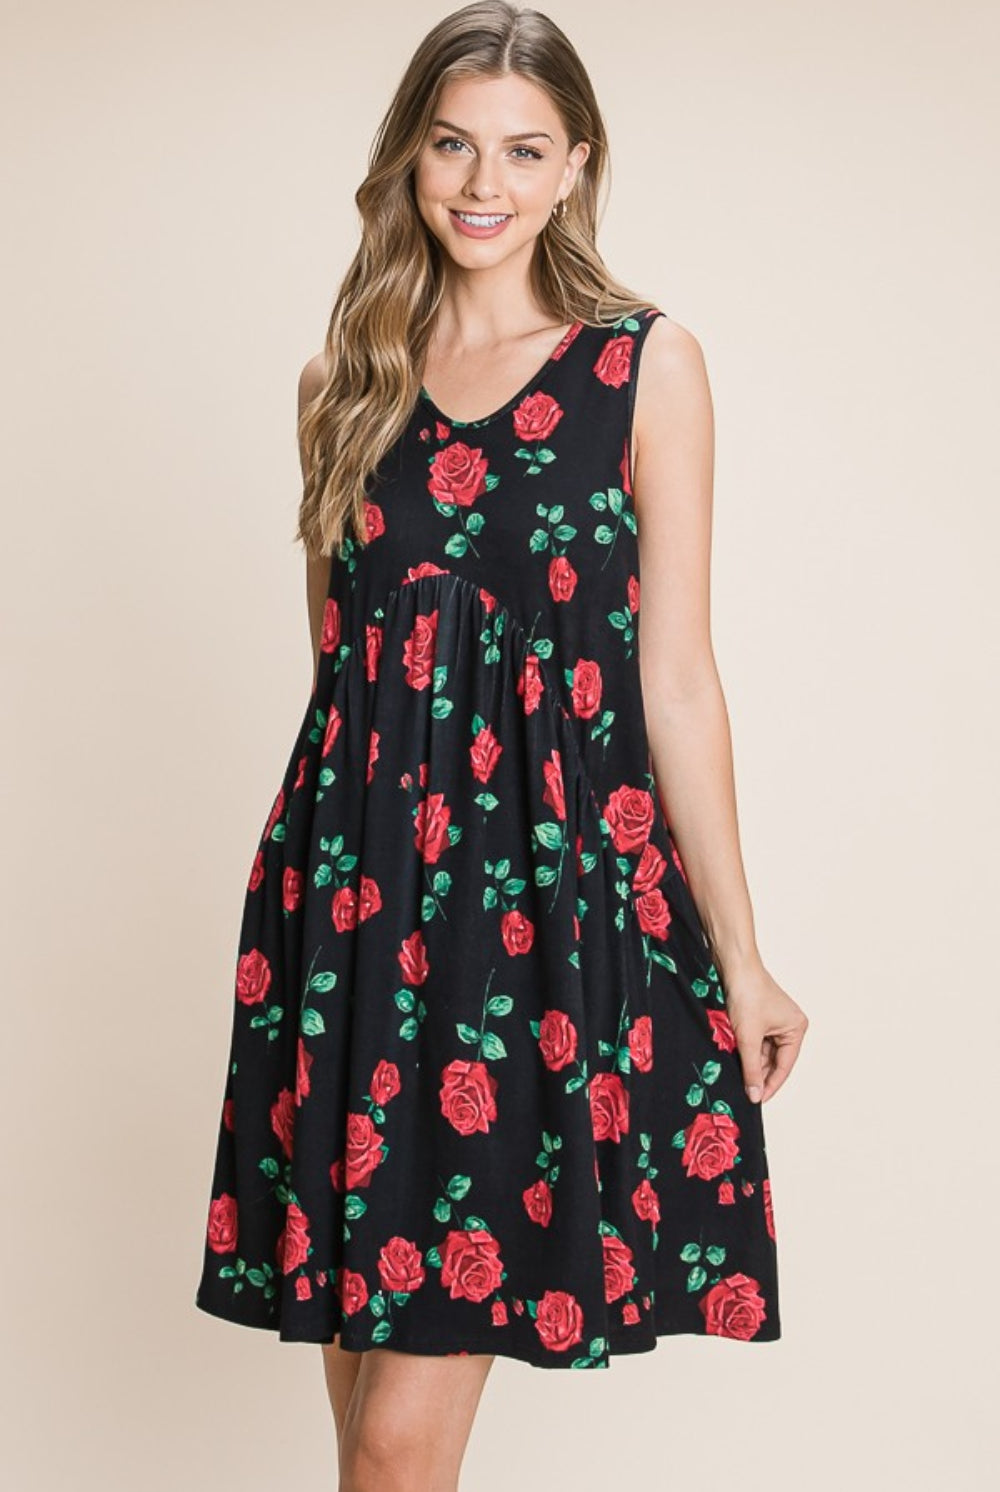 BOMBOM Floral Ruched Tank Dress - GemThreads Boutique BOMBOM Floral Ruched Tank Dress